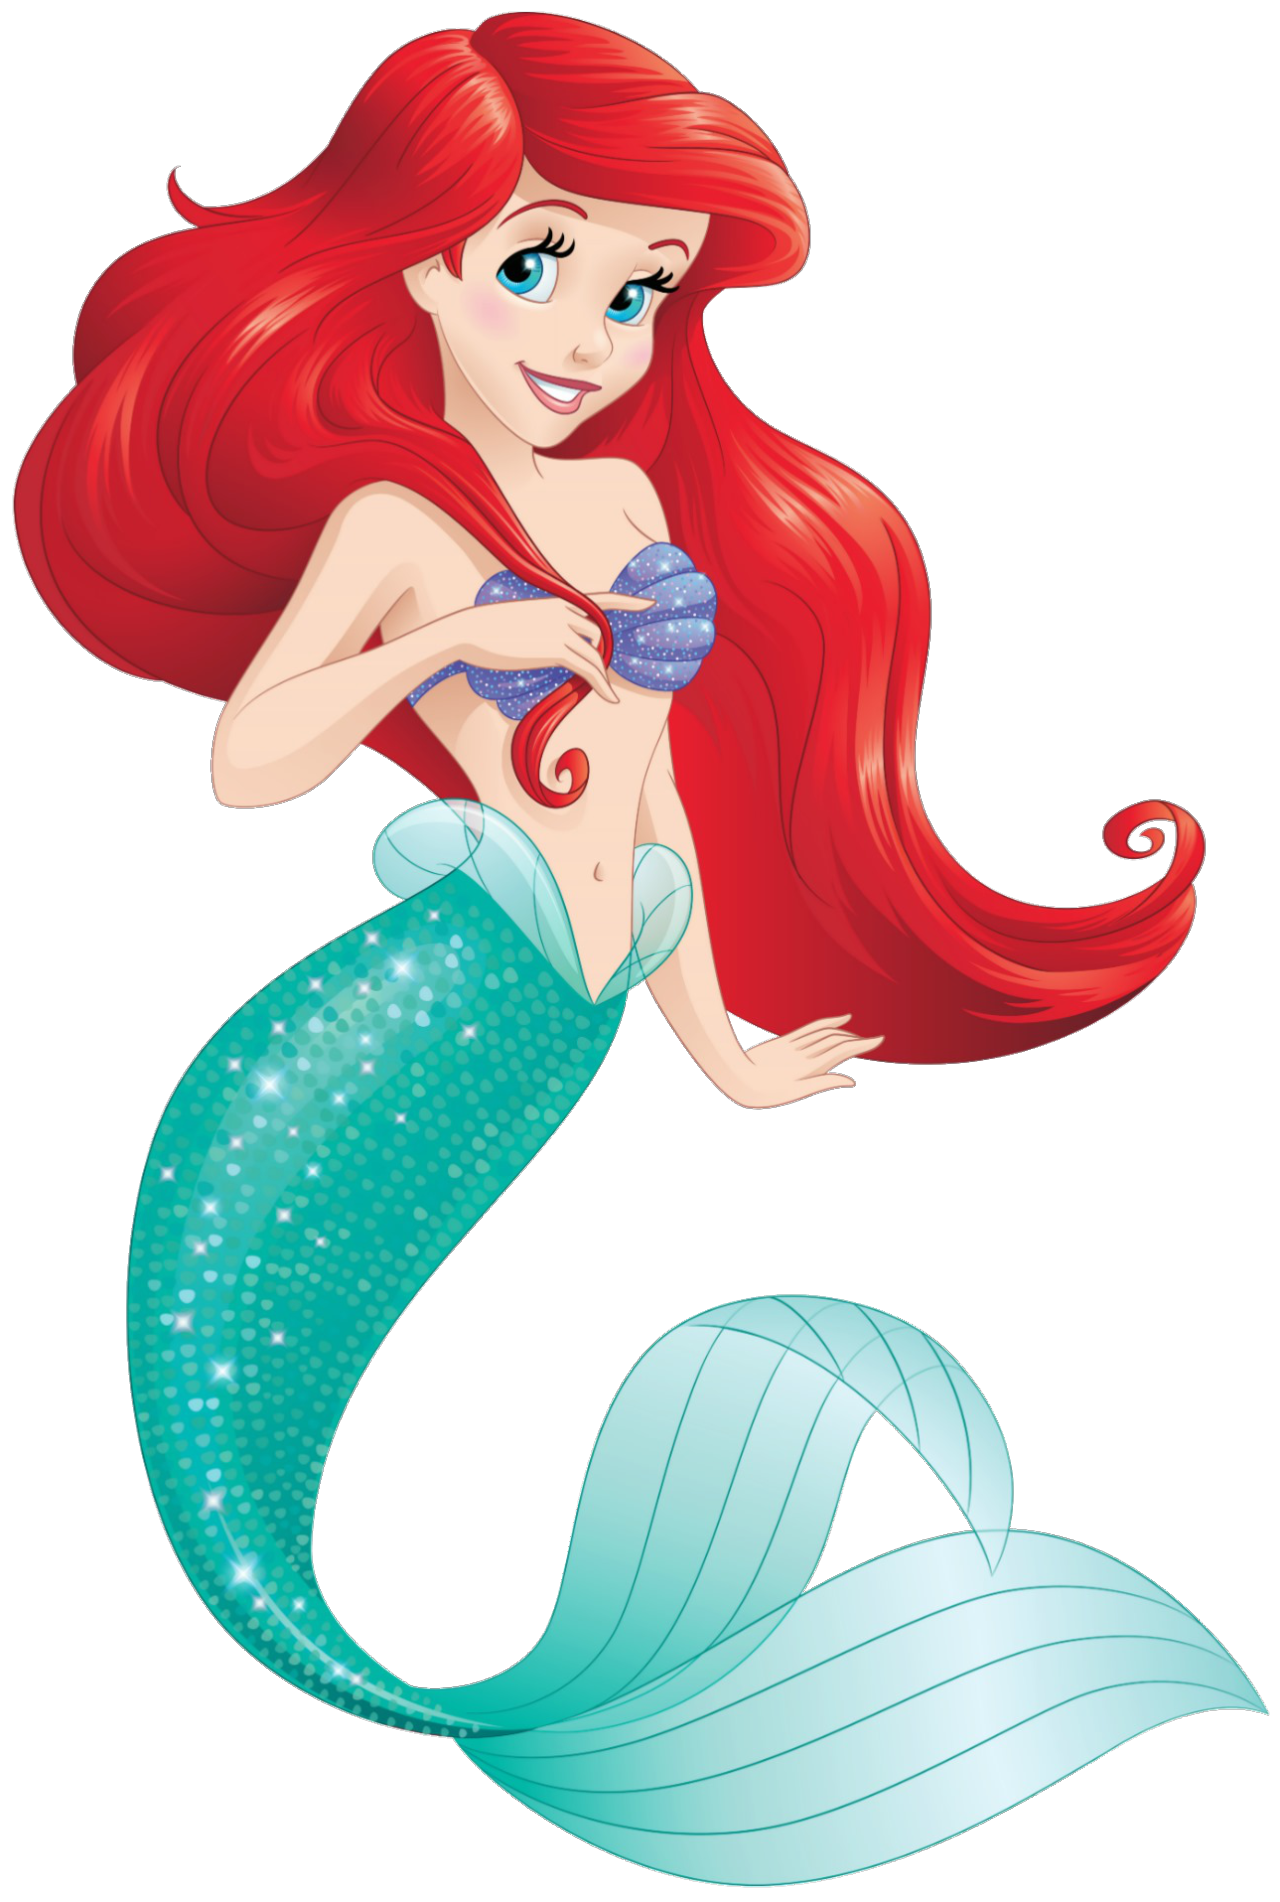 Png transparent free images. Numbers clipart mermaid